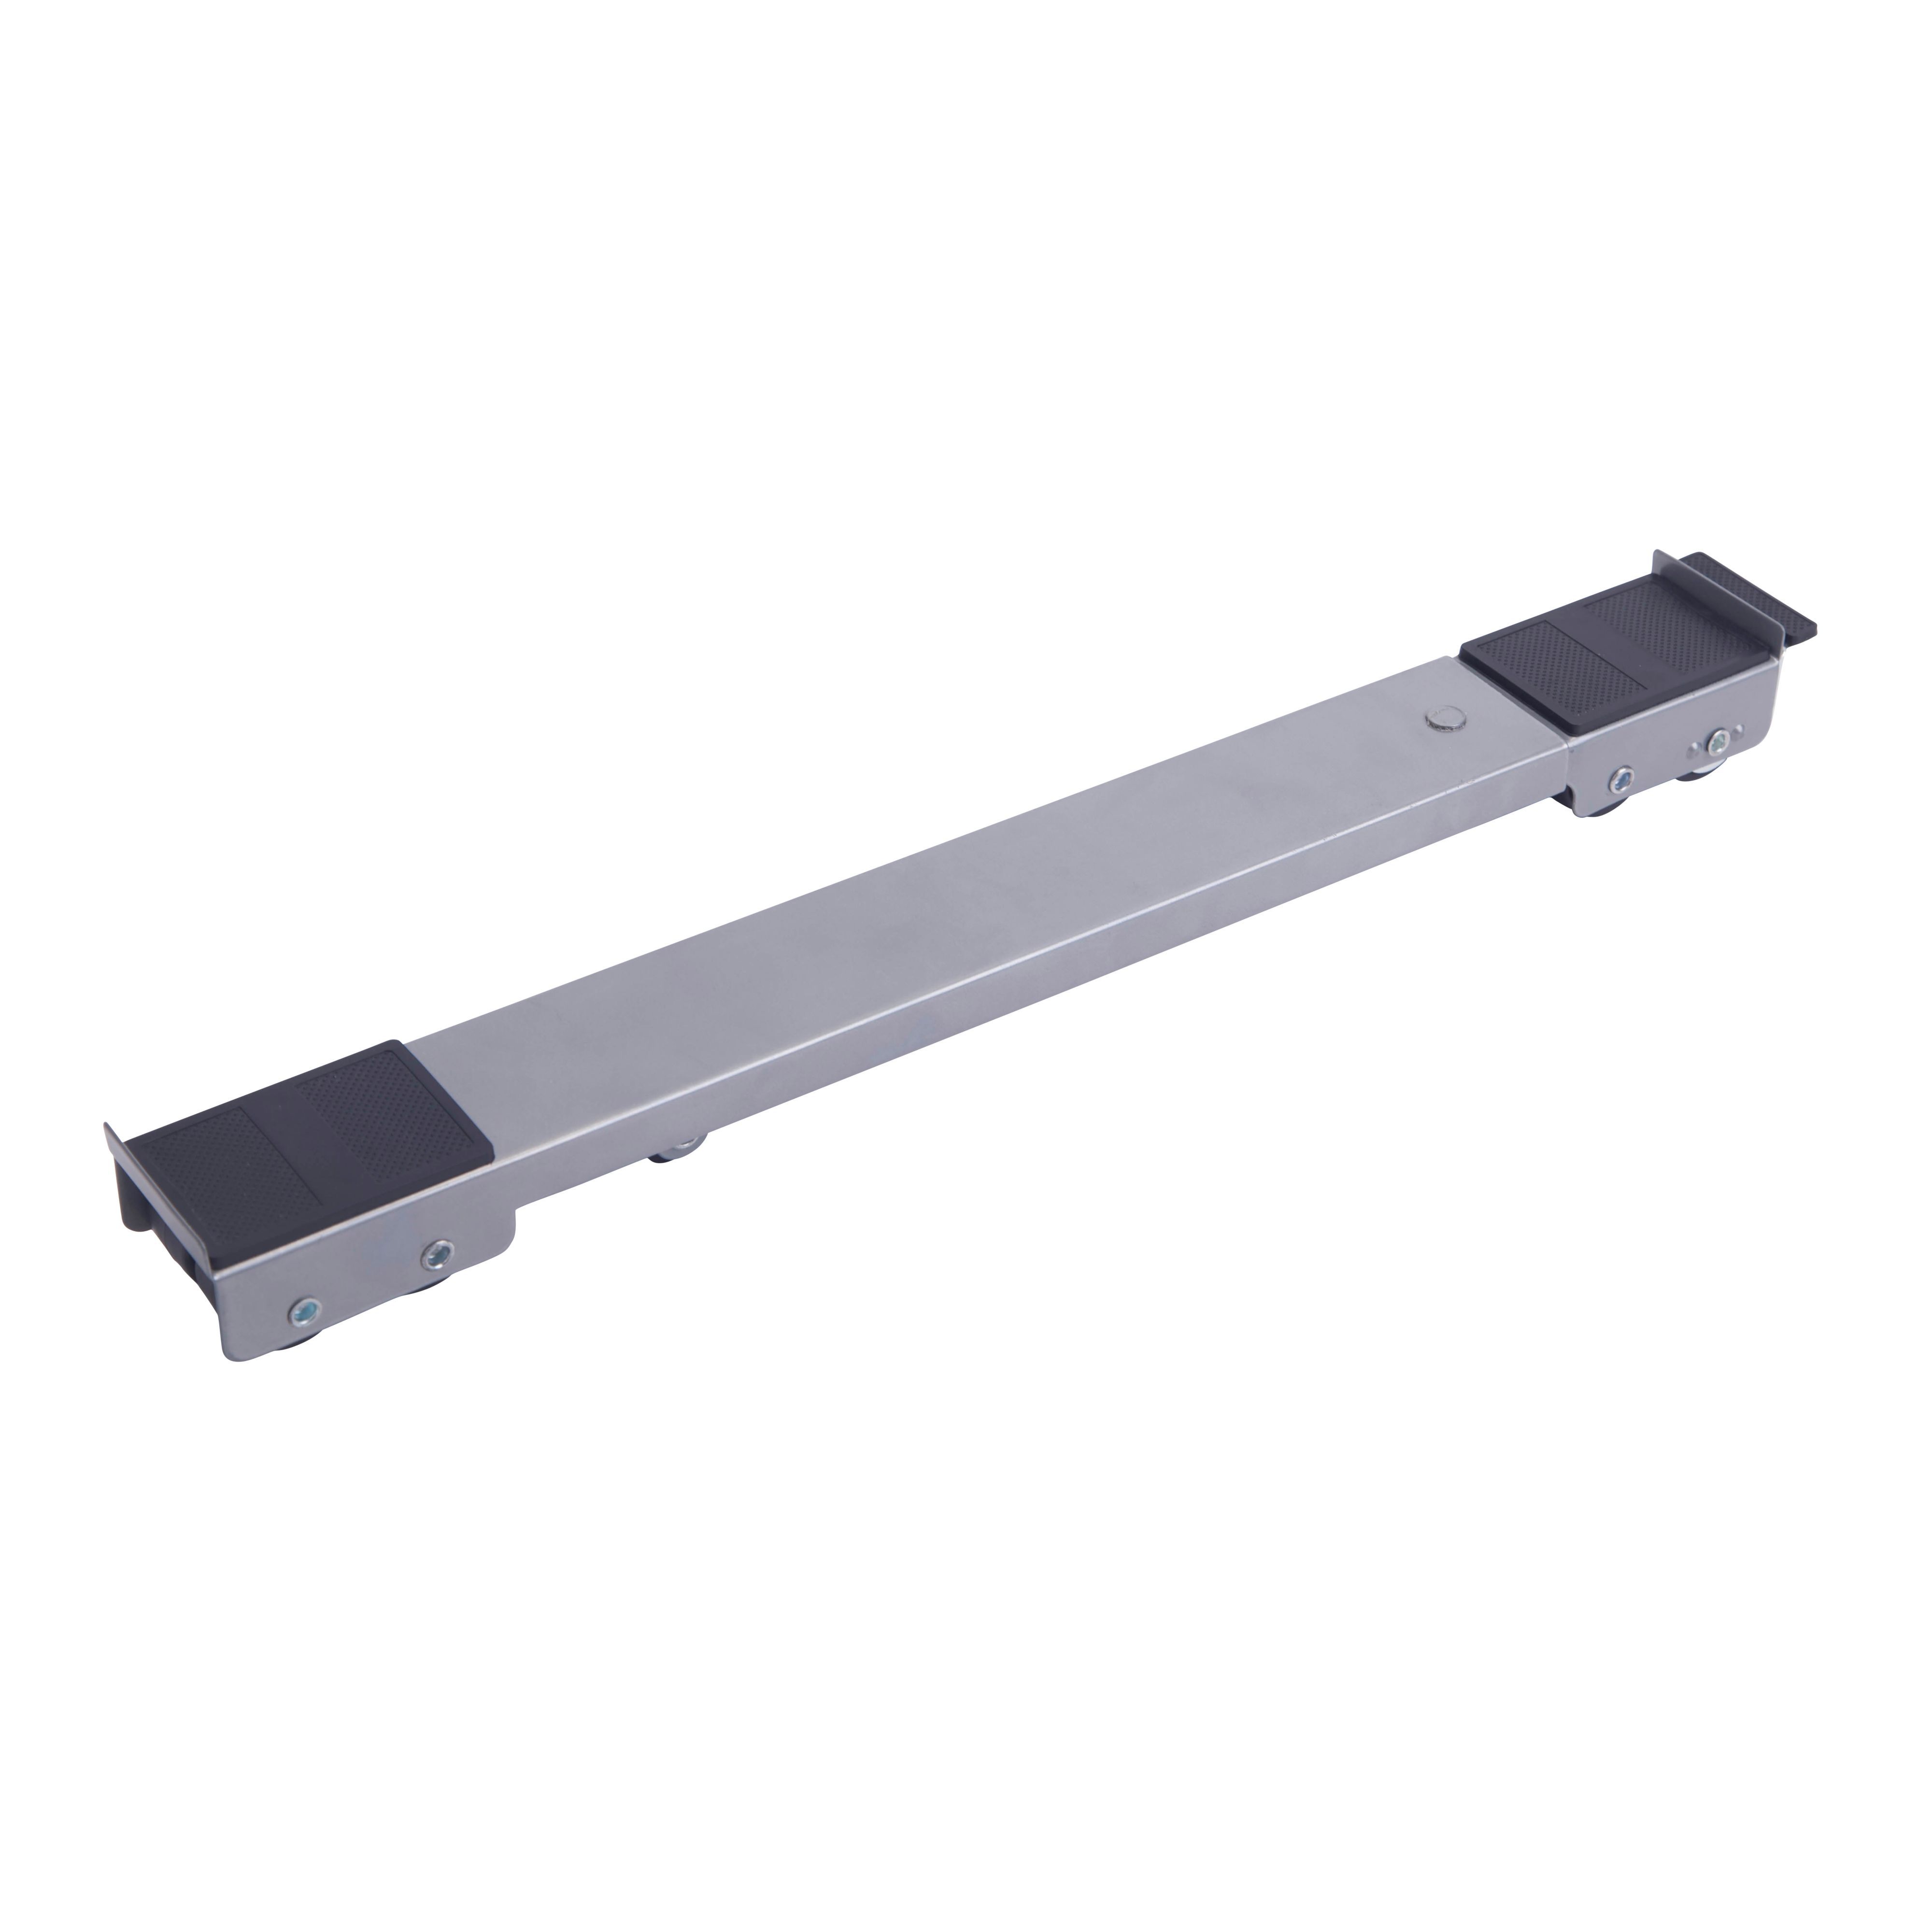 Diall Appliance roller (L)470mm- 660mm, 220kg capacity